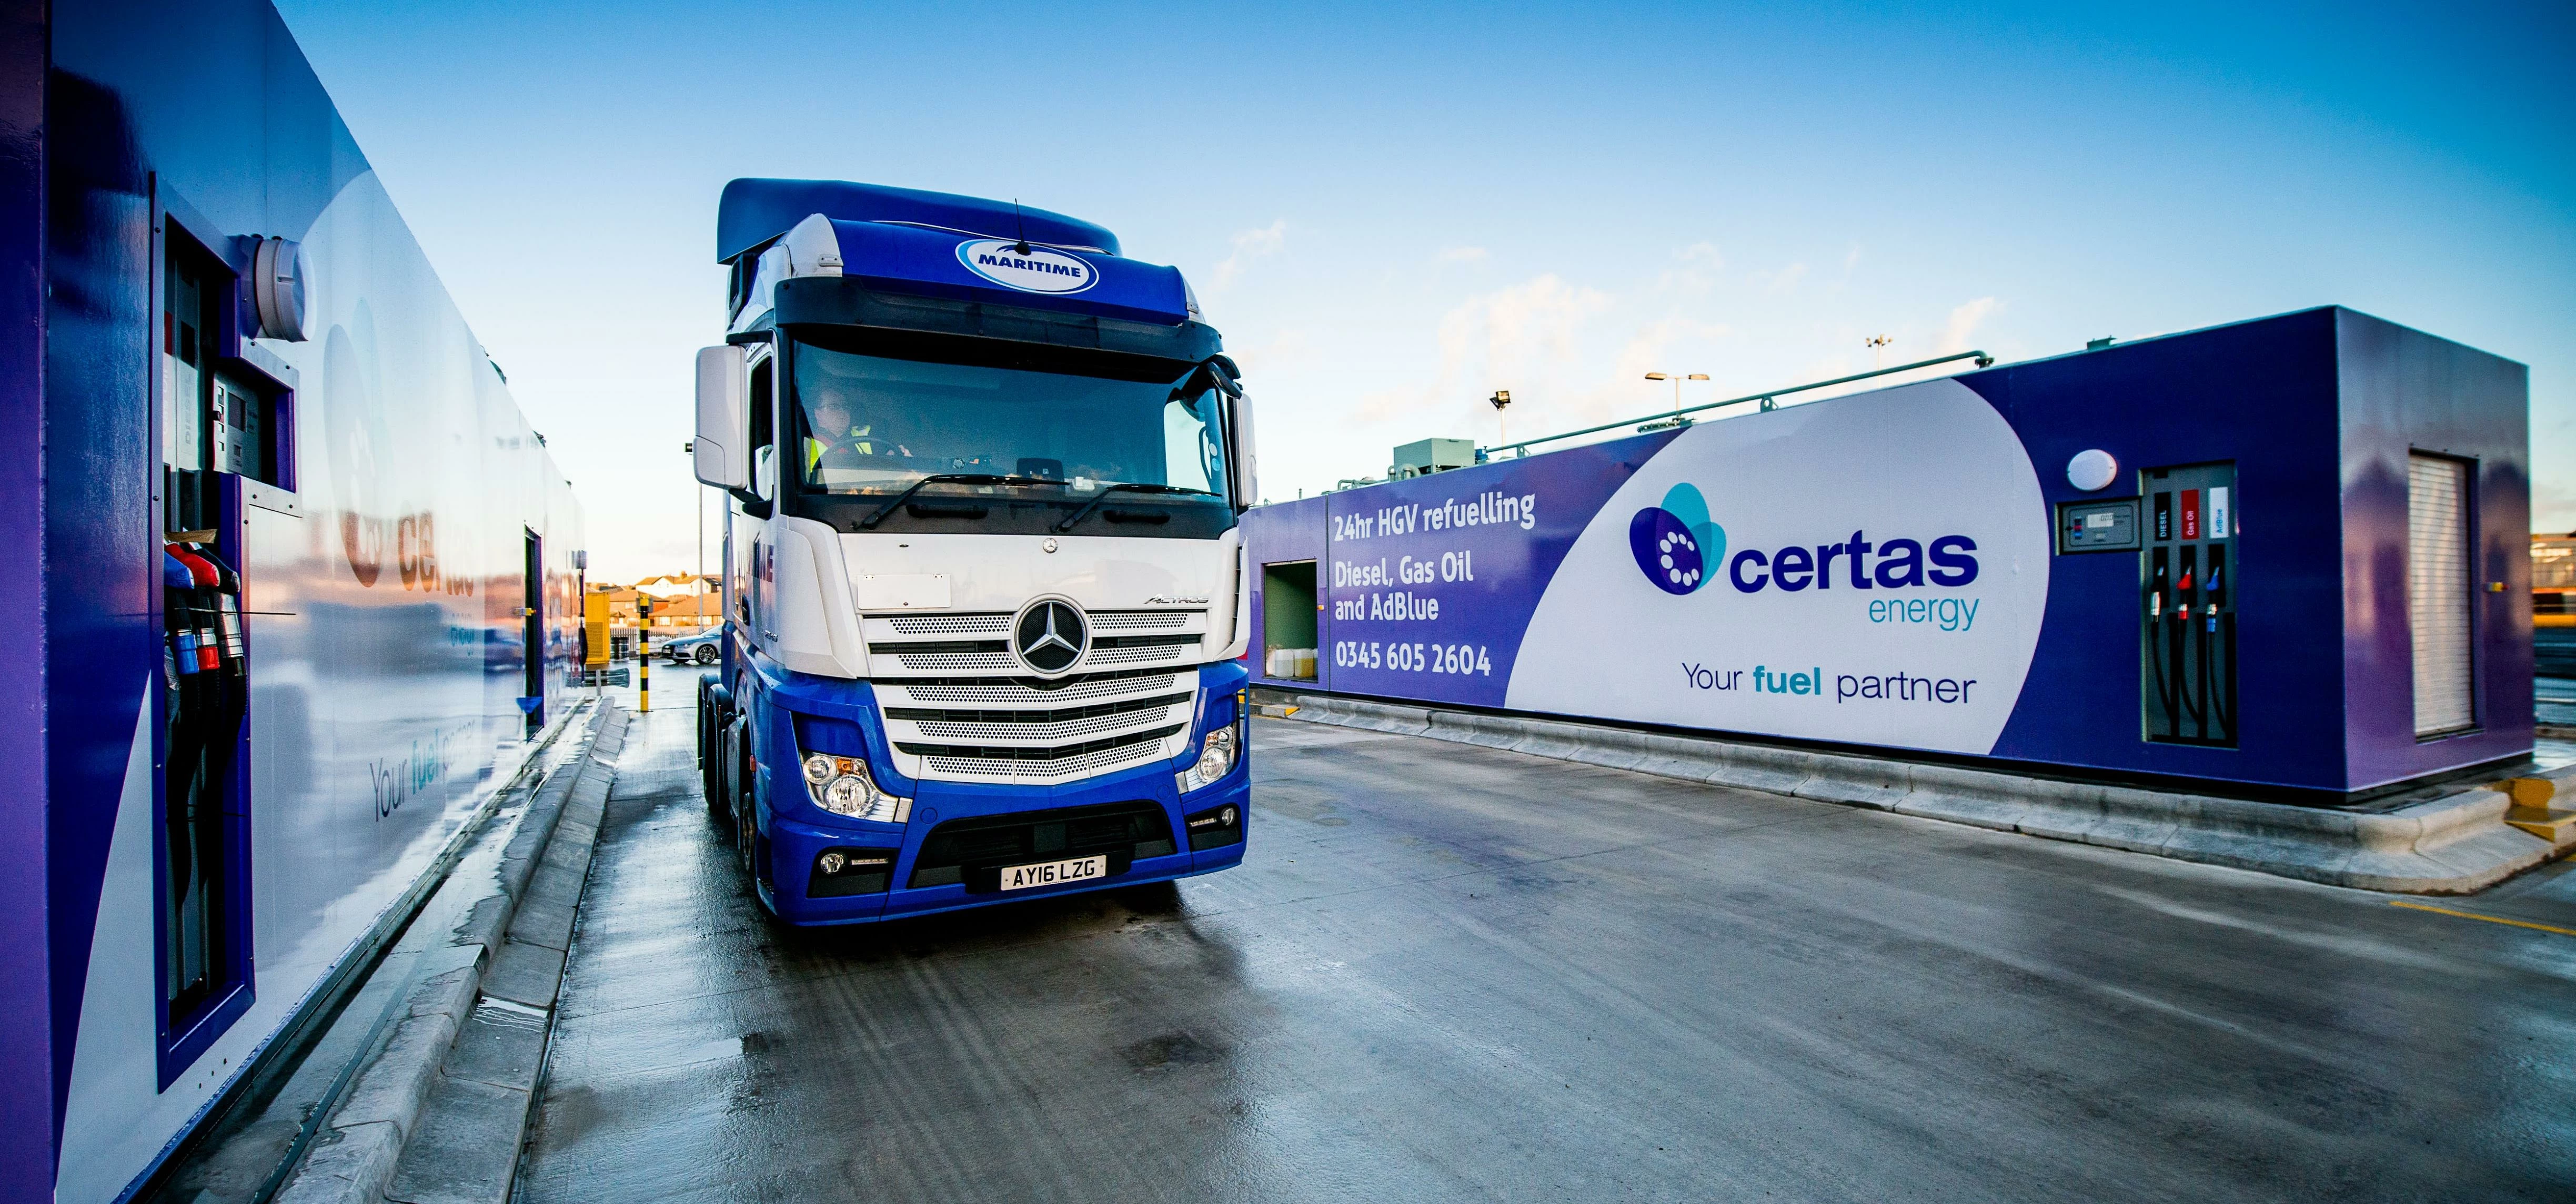 The new Certas Energy 24-hour refuelling station at the Port of Liverpool.